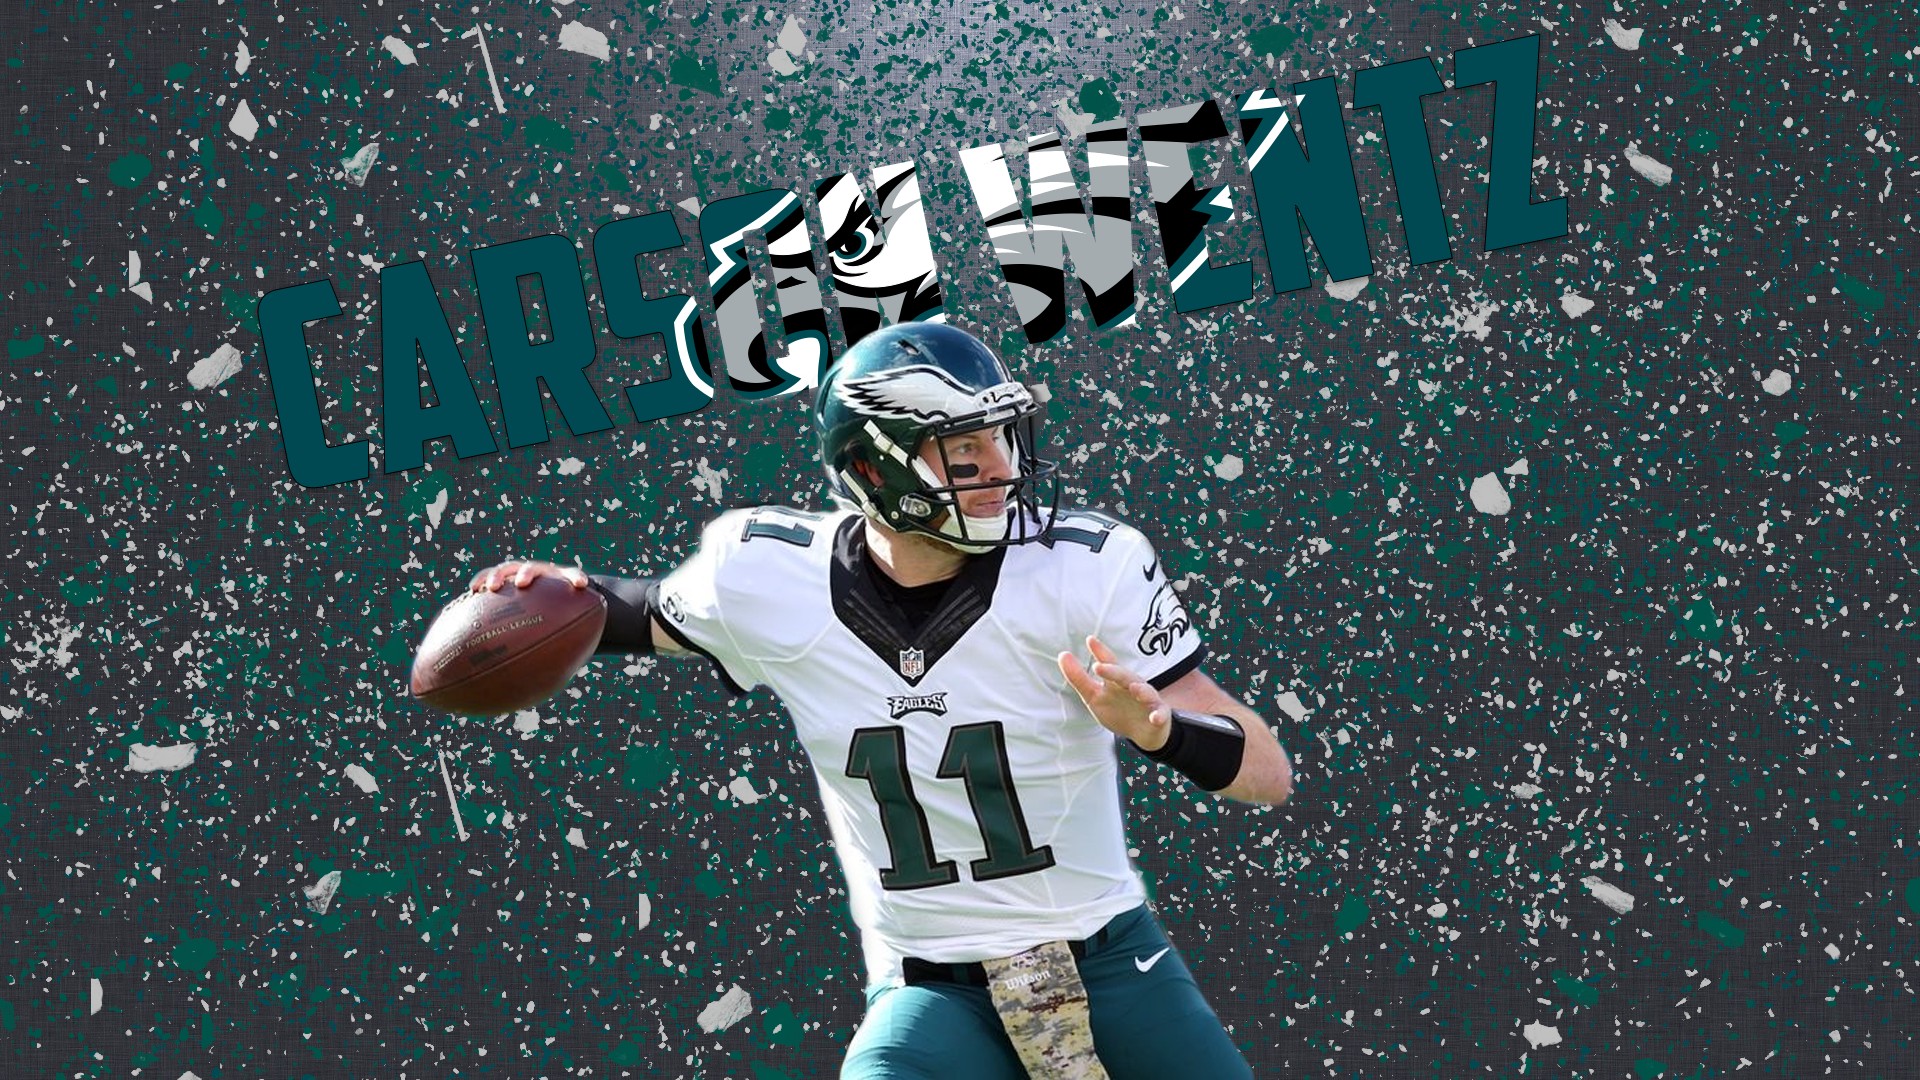 HD Philadelphia Eagles Backgrounds With Resolution 1920X1080 pixel. You can make this wallpaper for your Mac or Windows Desktop Background, iPhone, Android or Tablet and another Smartphone device for free